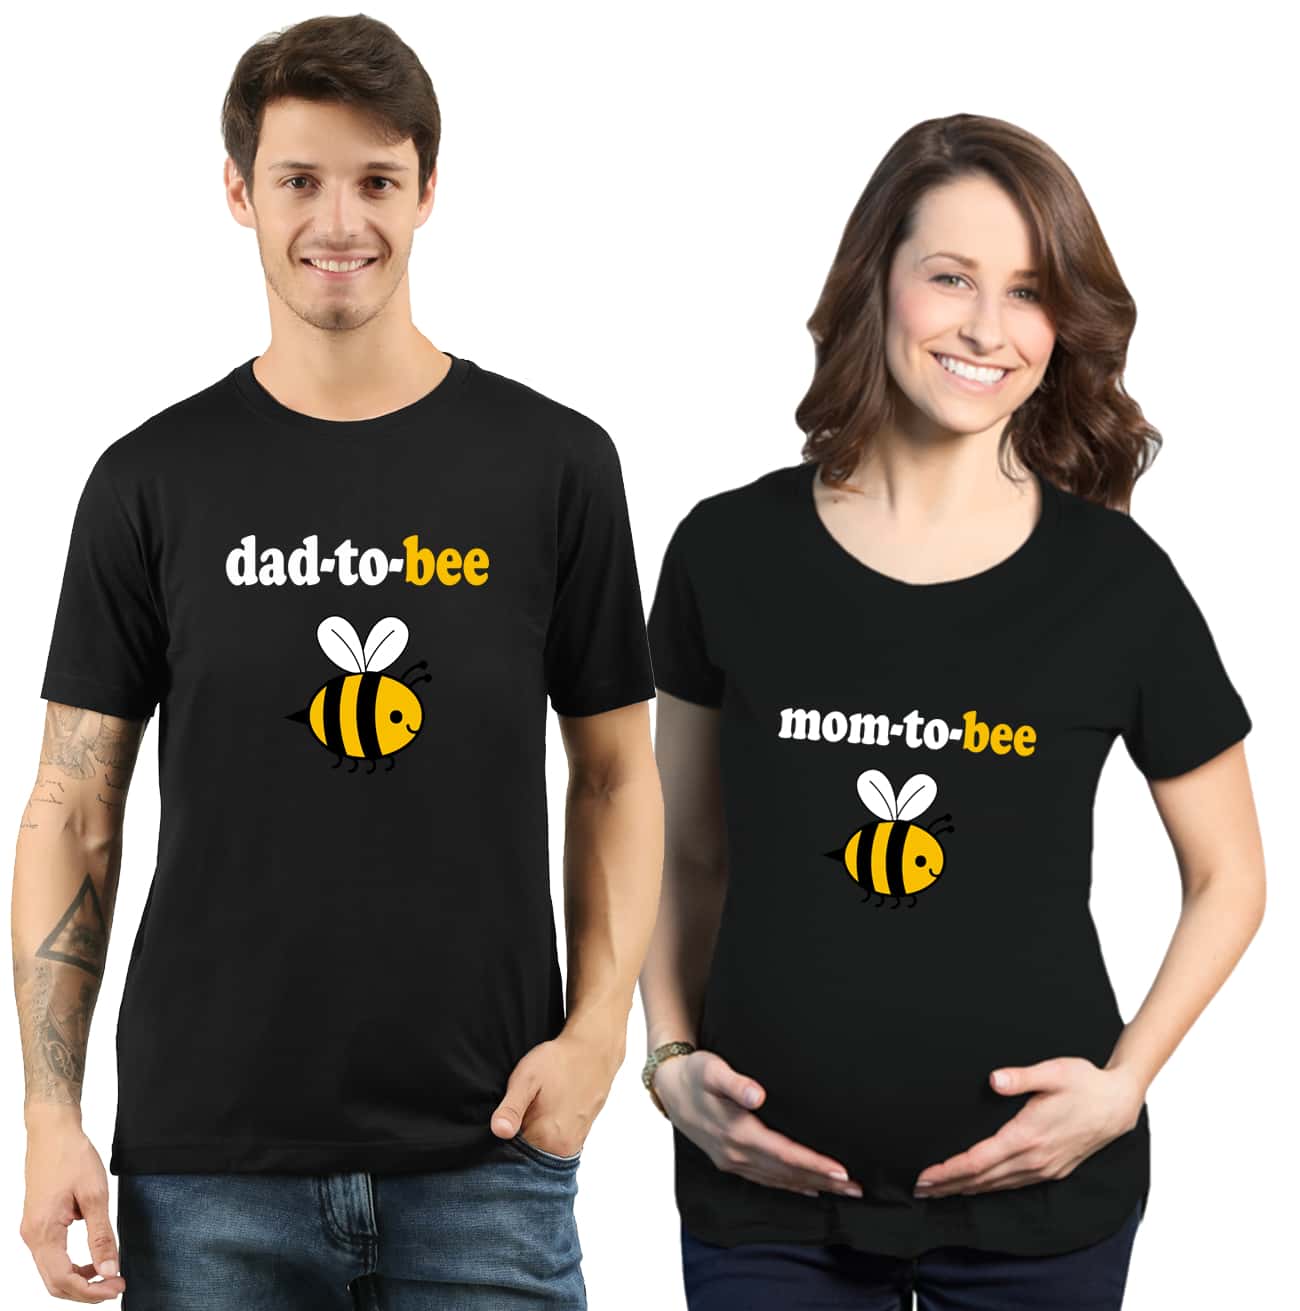 Dad to bee Mom to bee Maternity Couple T-Shirts for Photoshoot ...